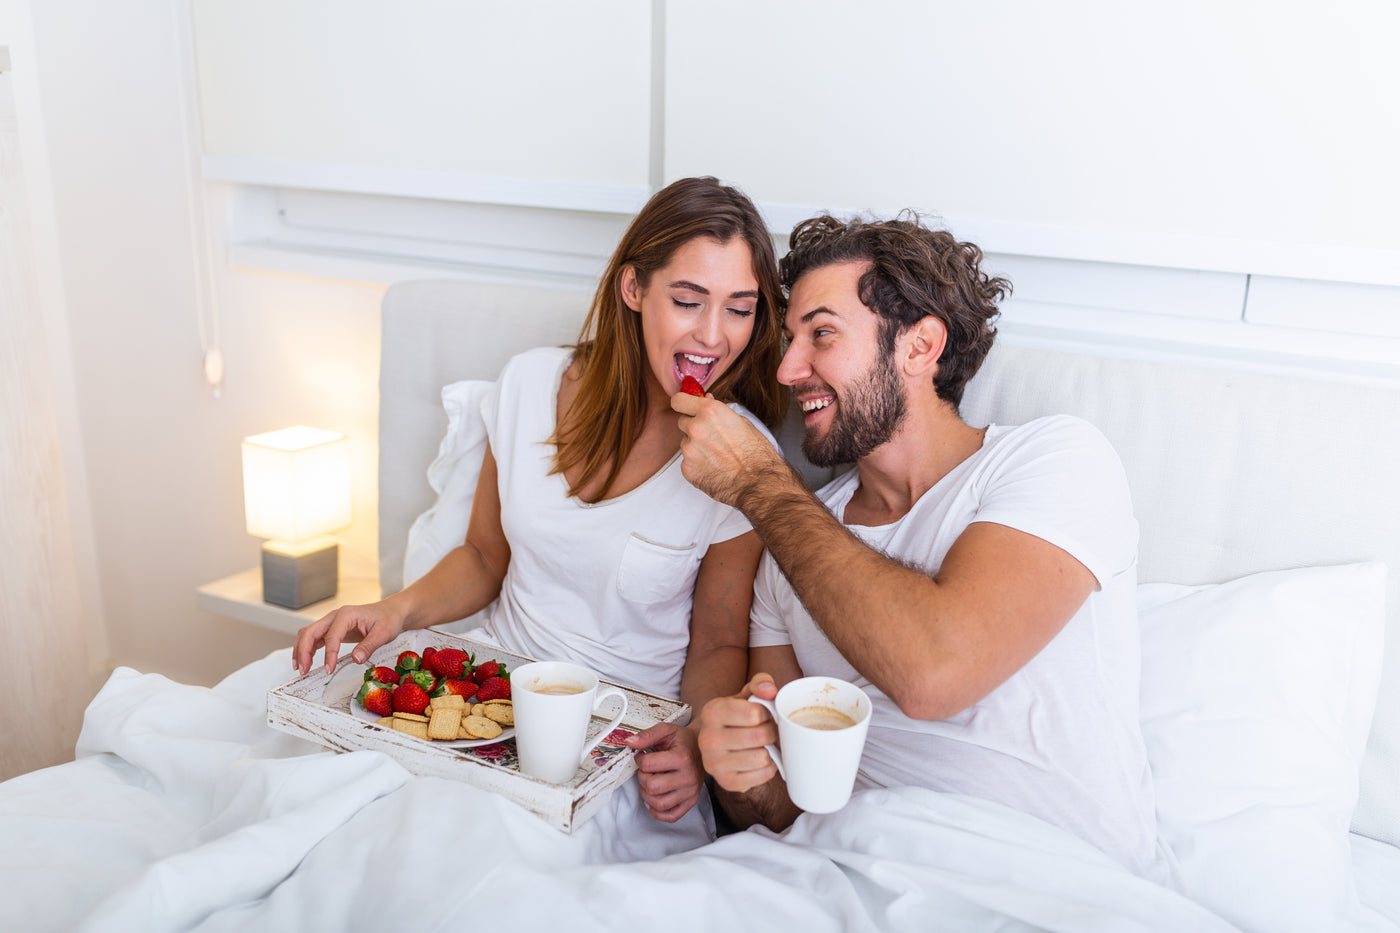 Man feeding his wife on bed